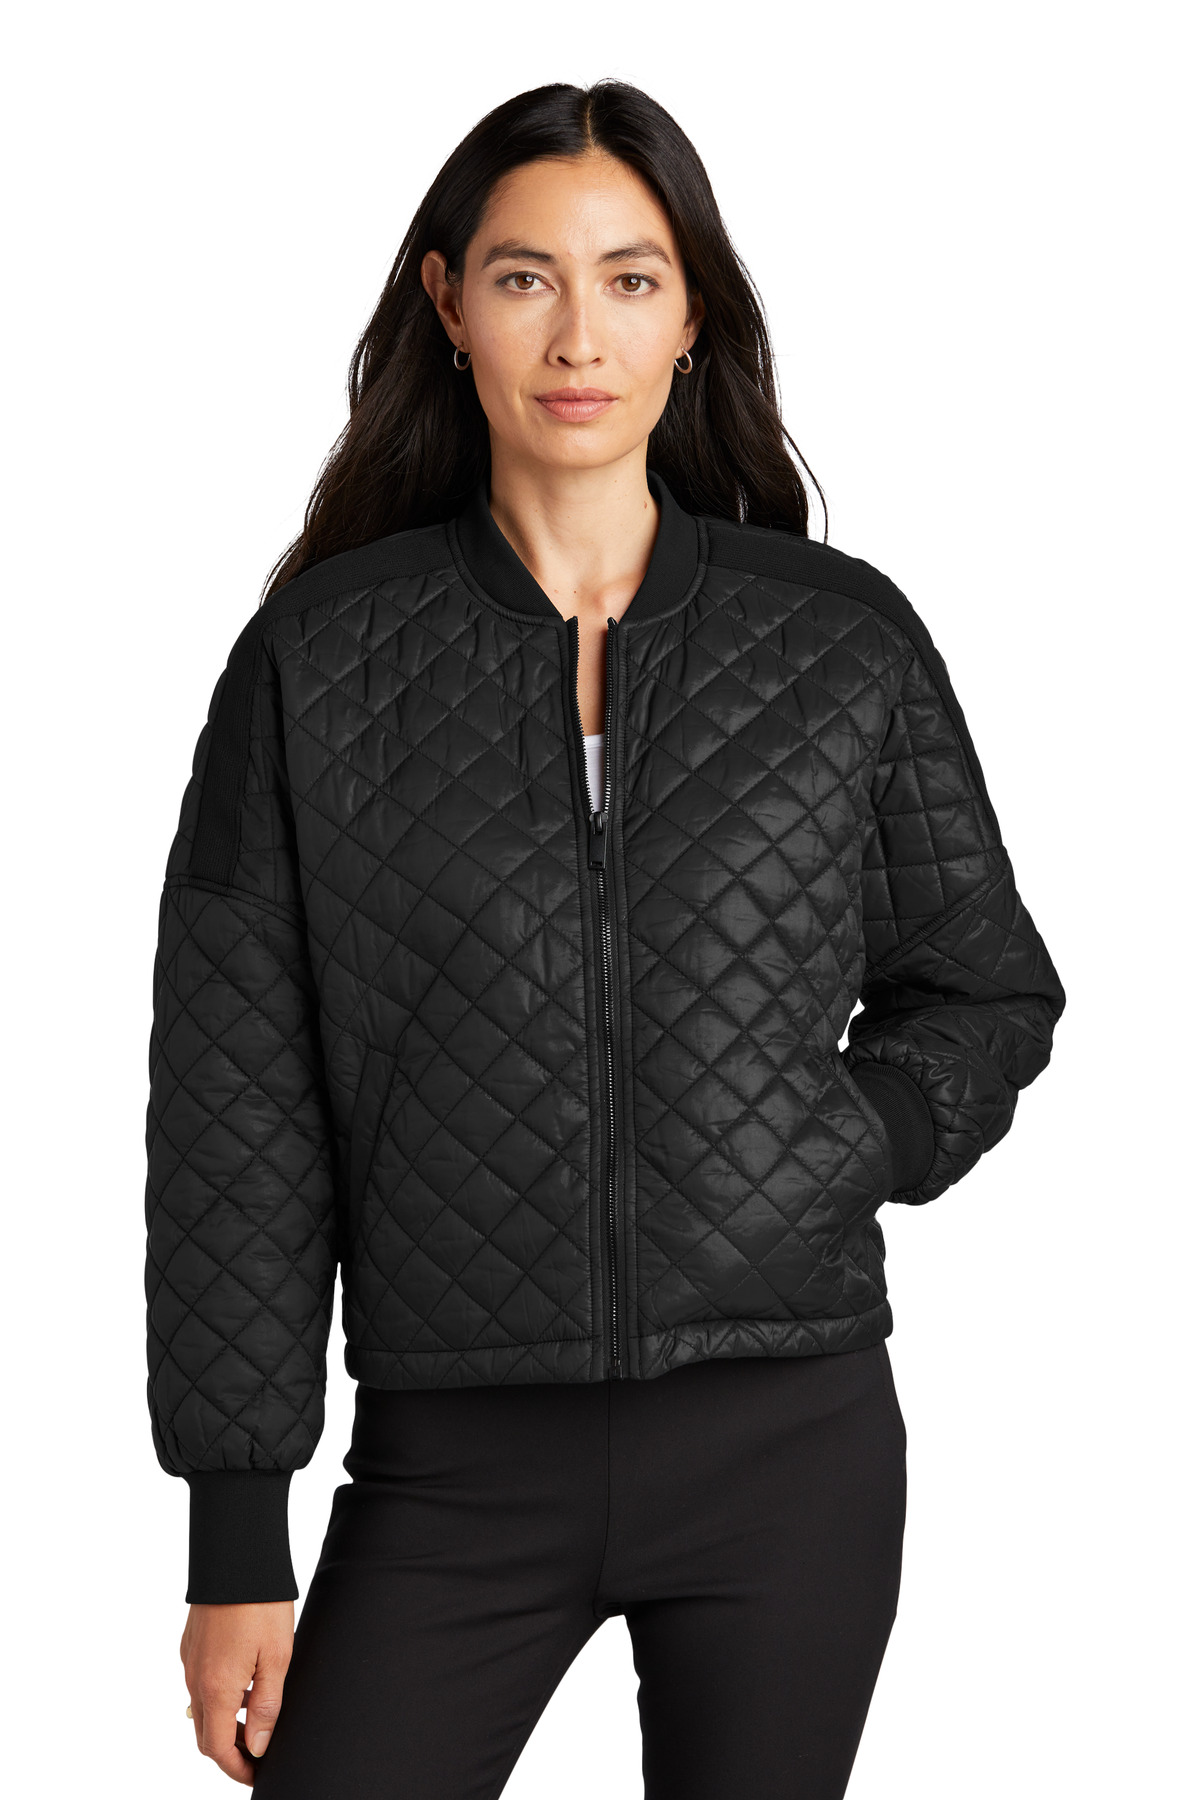 MERCER+METTLE Women's Boxy Quilted Jacket MM7201